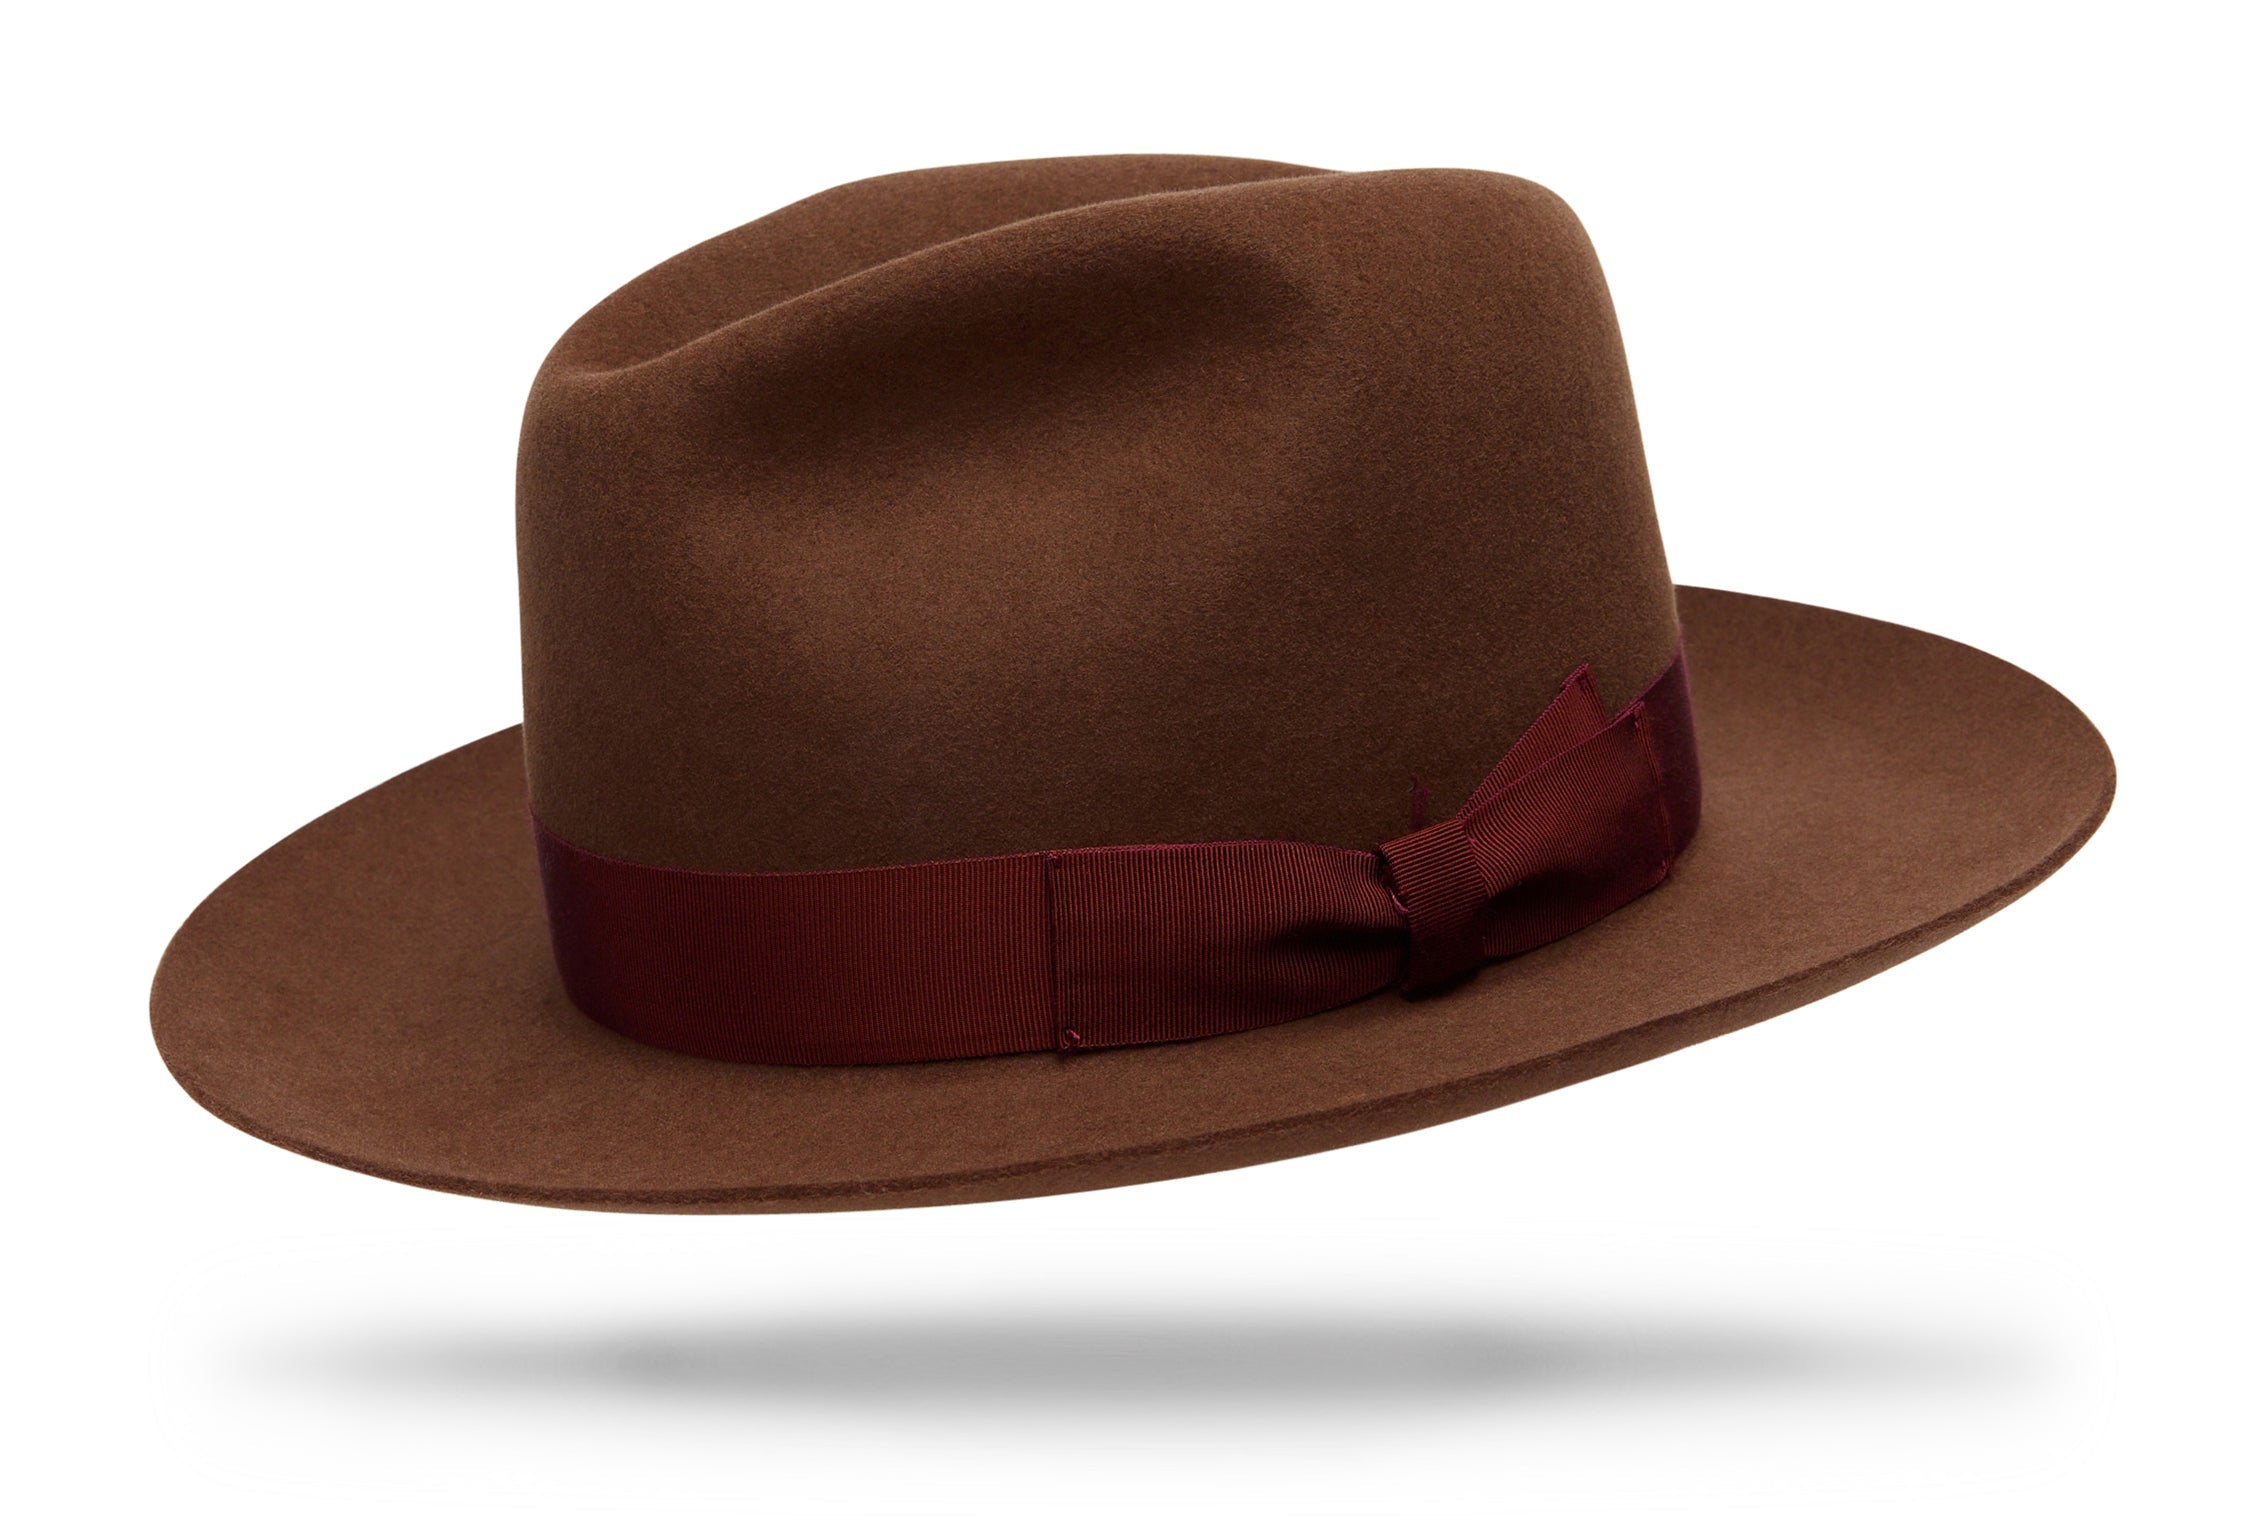 
Design
Our new spin on our timeless classic, the Sienna carries a 4 C-crown and holds a 3 snap brim. Should be a staple in your wardrobe.
Material
Fur felt, sustainably acquired.
Specifications
A 115-gram fur felt beauty. The Sienna holds a 3 snap brim with a classic 4 C-crown. A refined cacao, harmonized with a rust double bow hatband.Handcrafted in our NYC atelier.